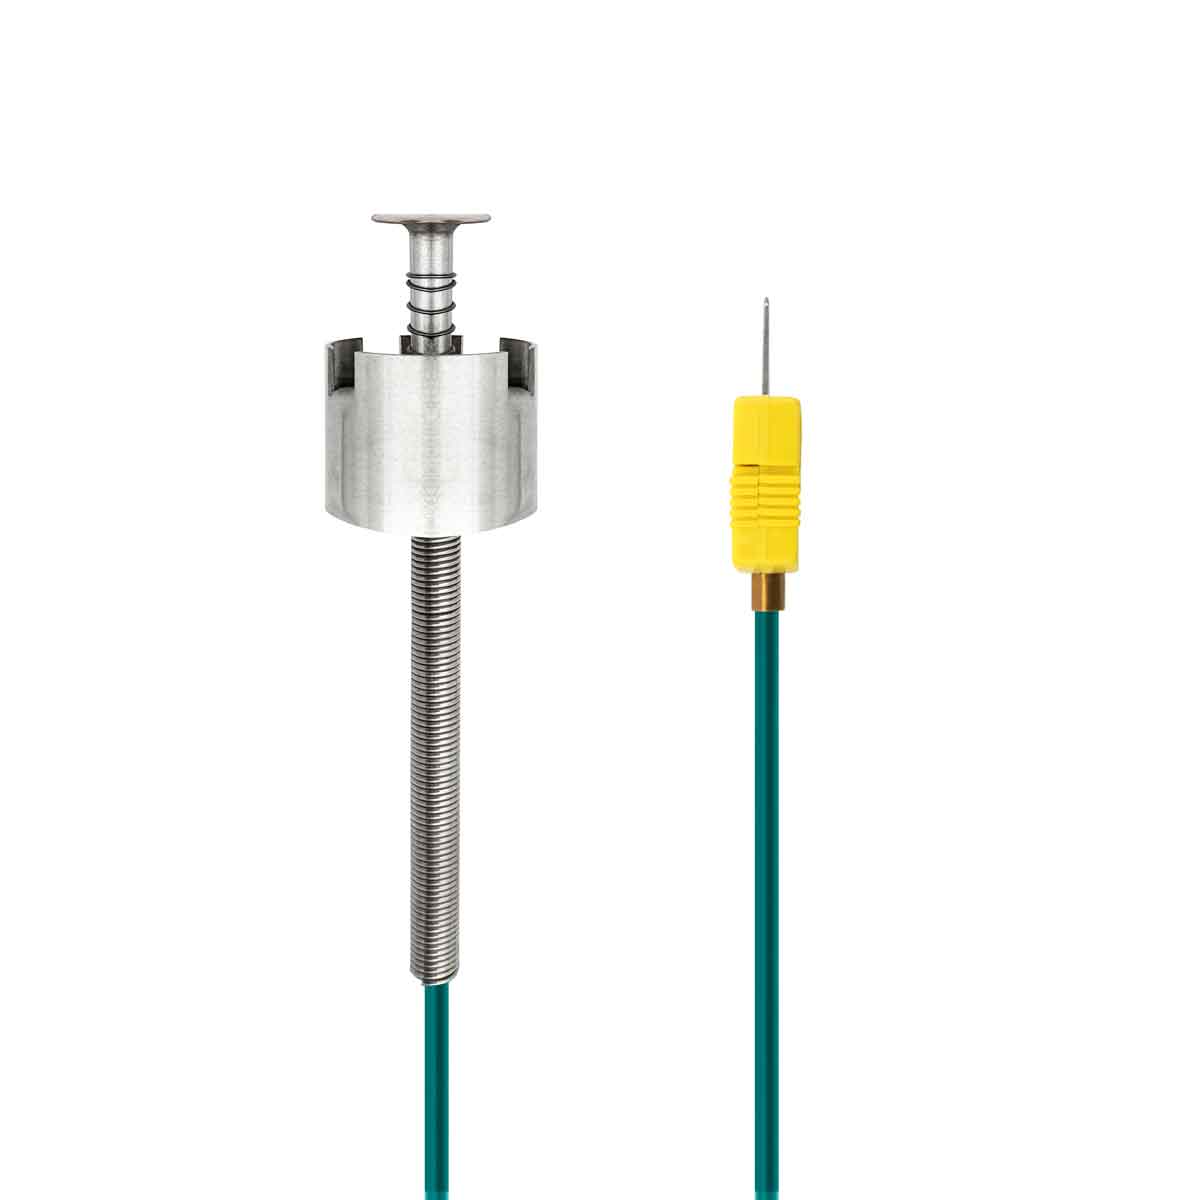 TL0203 Strong Magnetic K-Type Thermocouple Probe 500°F